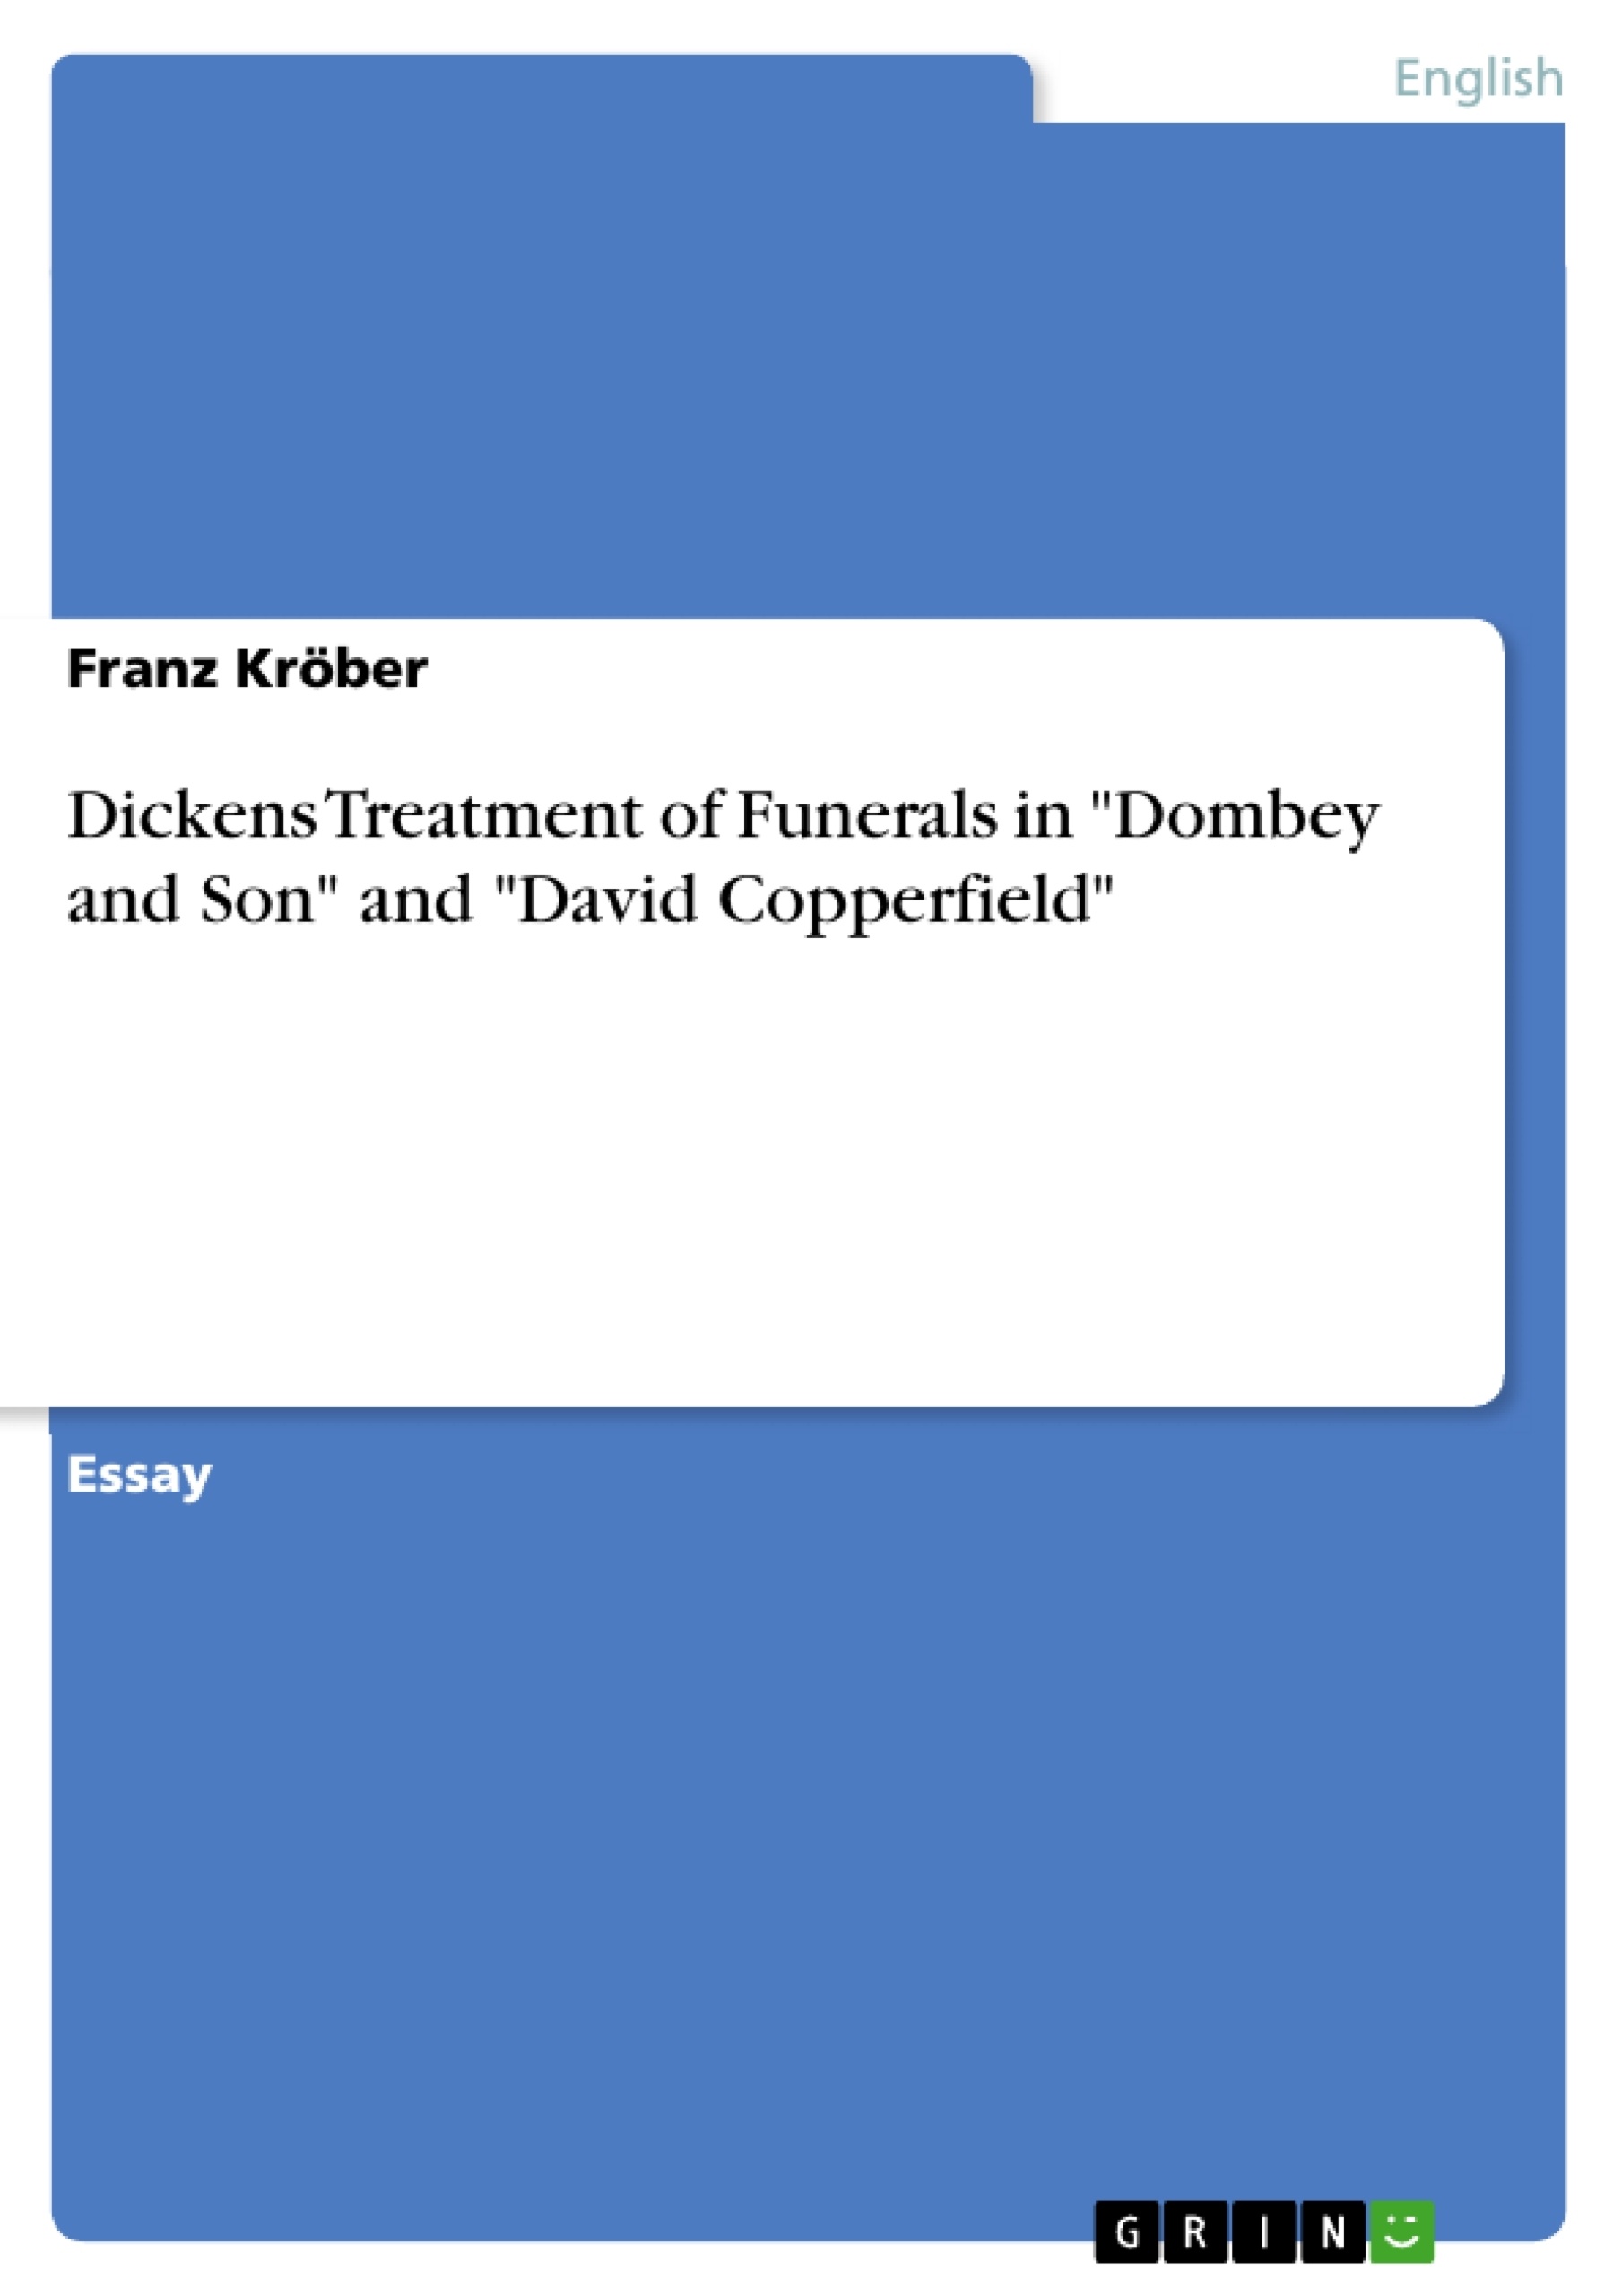 Titre: Dickens Treatment of Funerals in "Dombey and Son" and "David Copperfield"